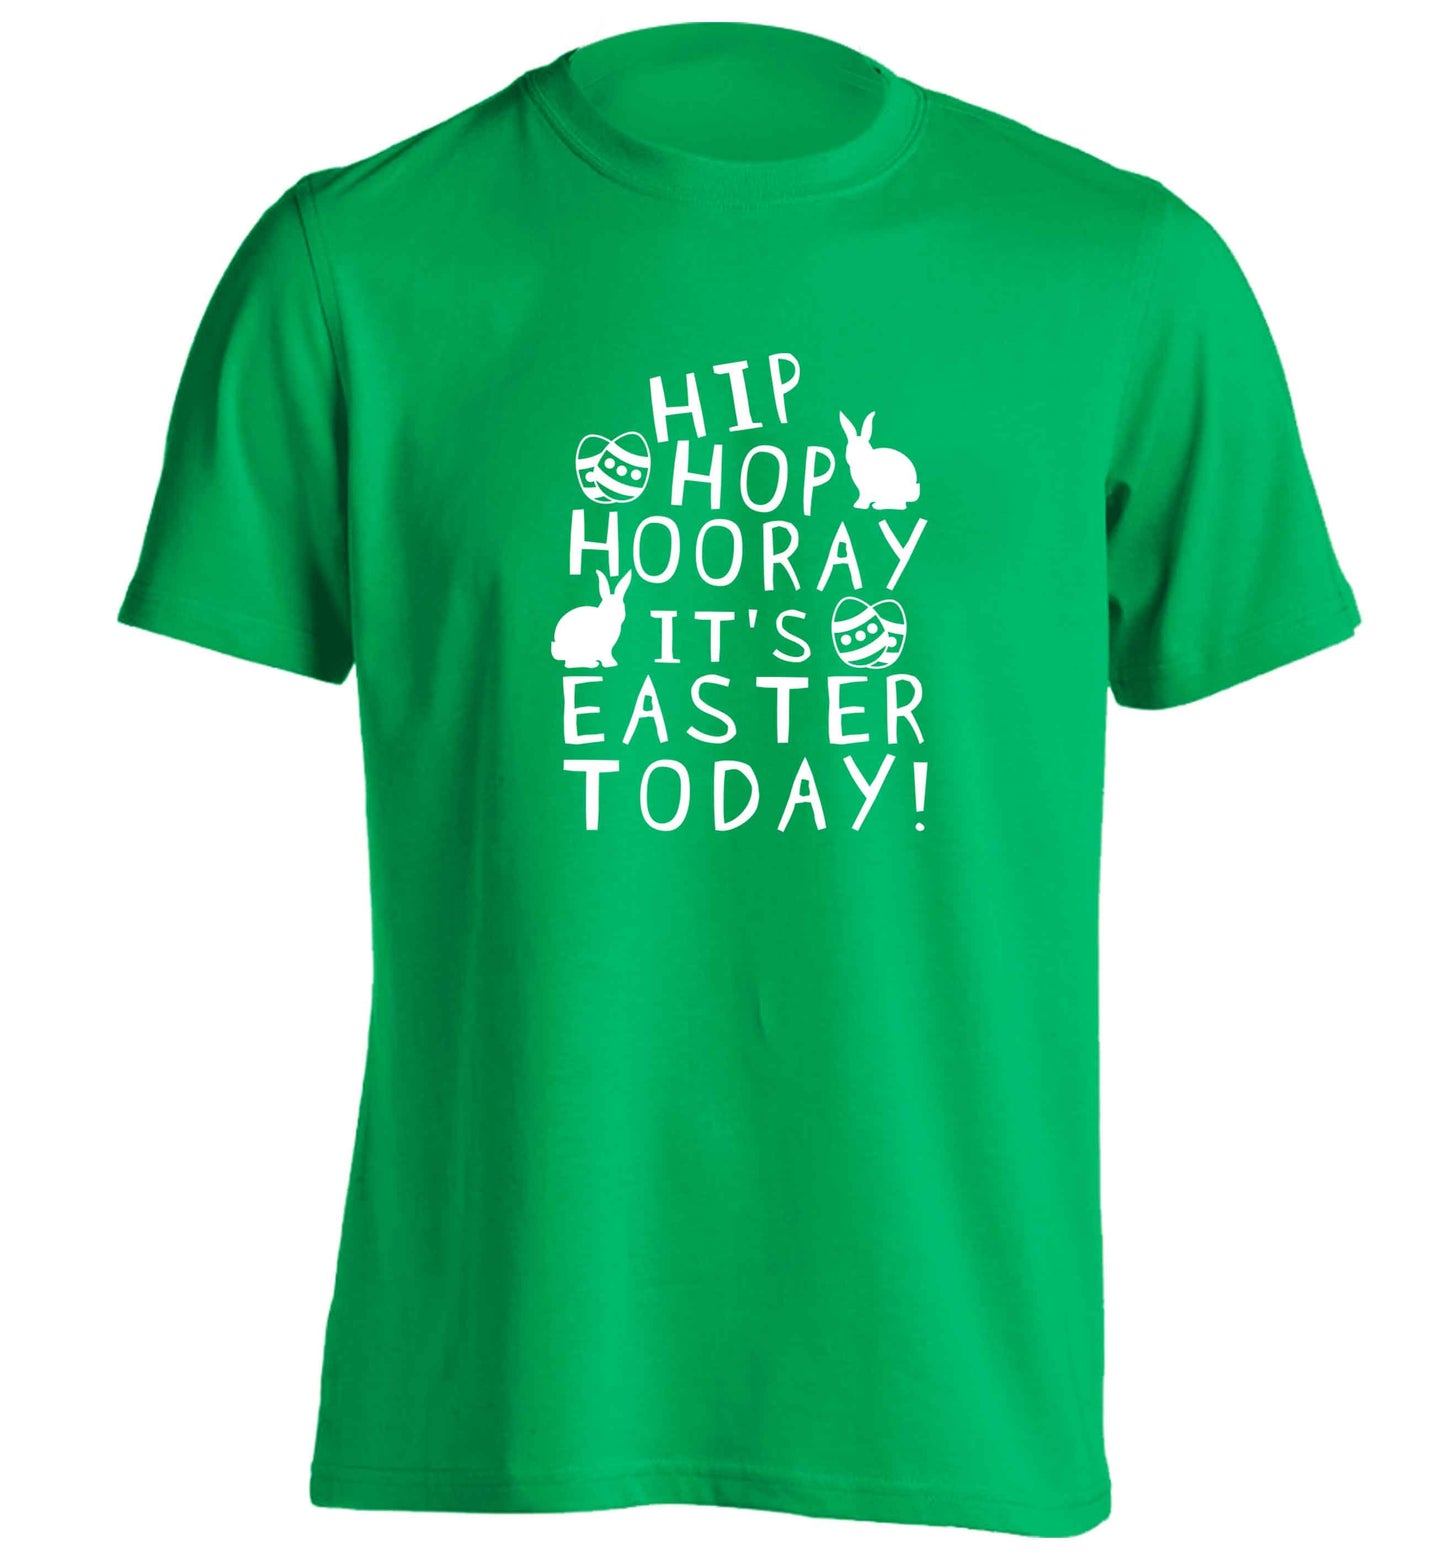 Hip hip hooray it's Easter today! adults unisex green Tshirt 2XL